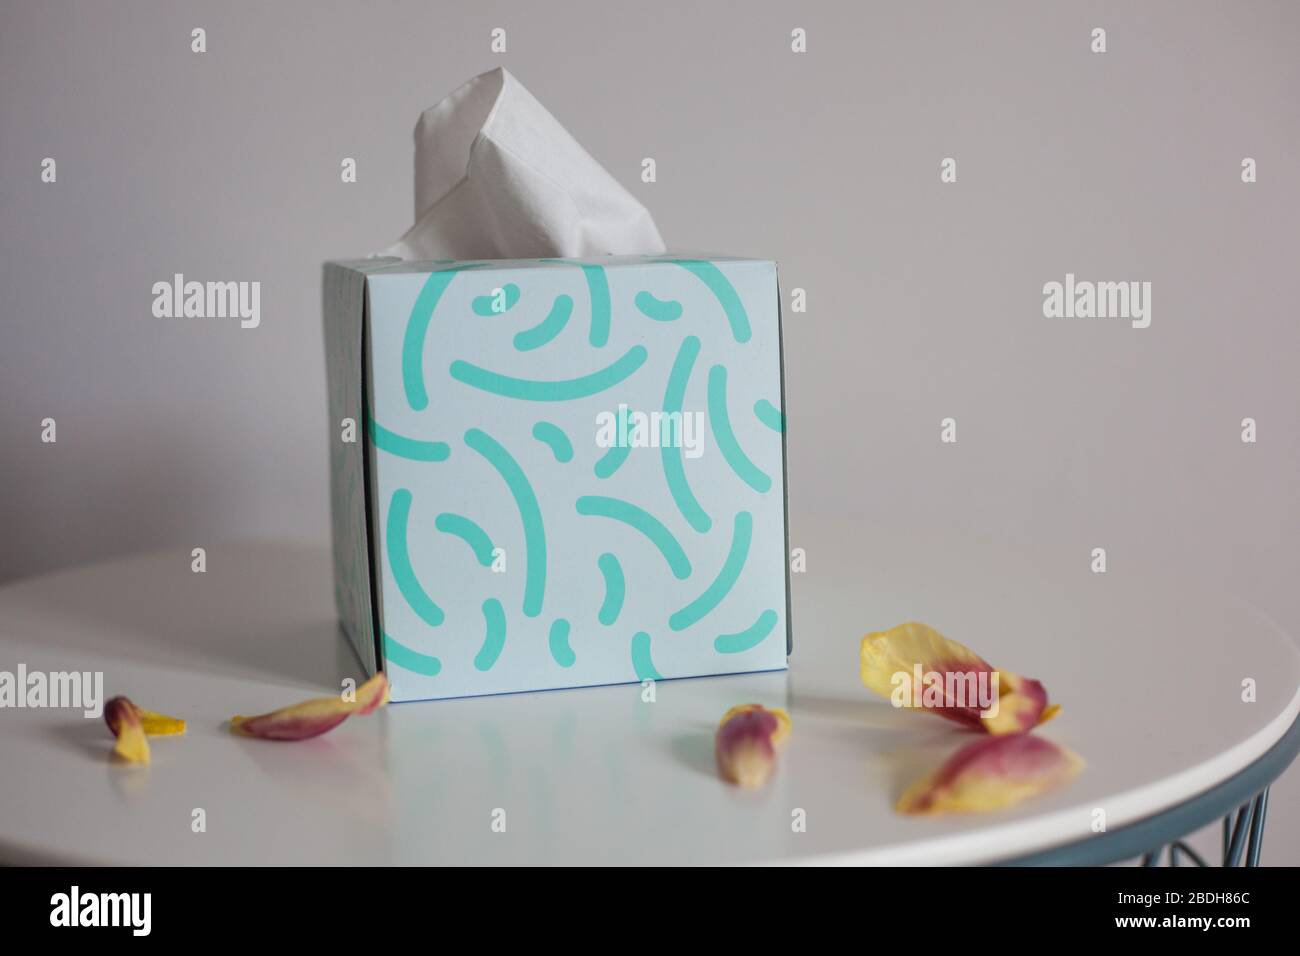 Box of tissues on table with petals Stock Photo